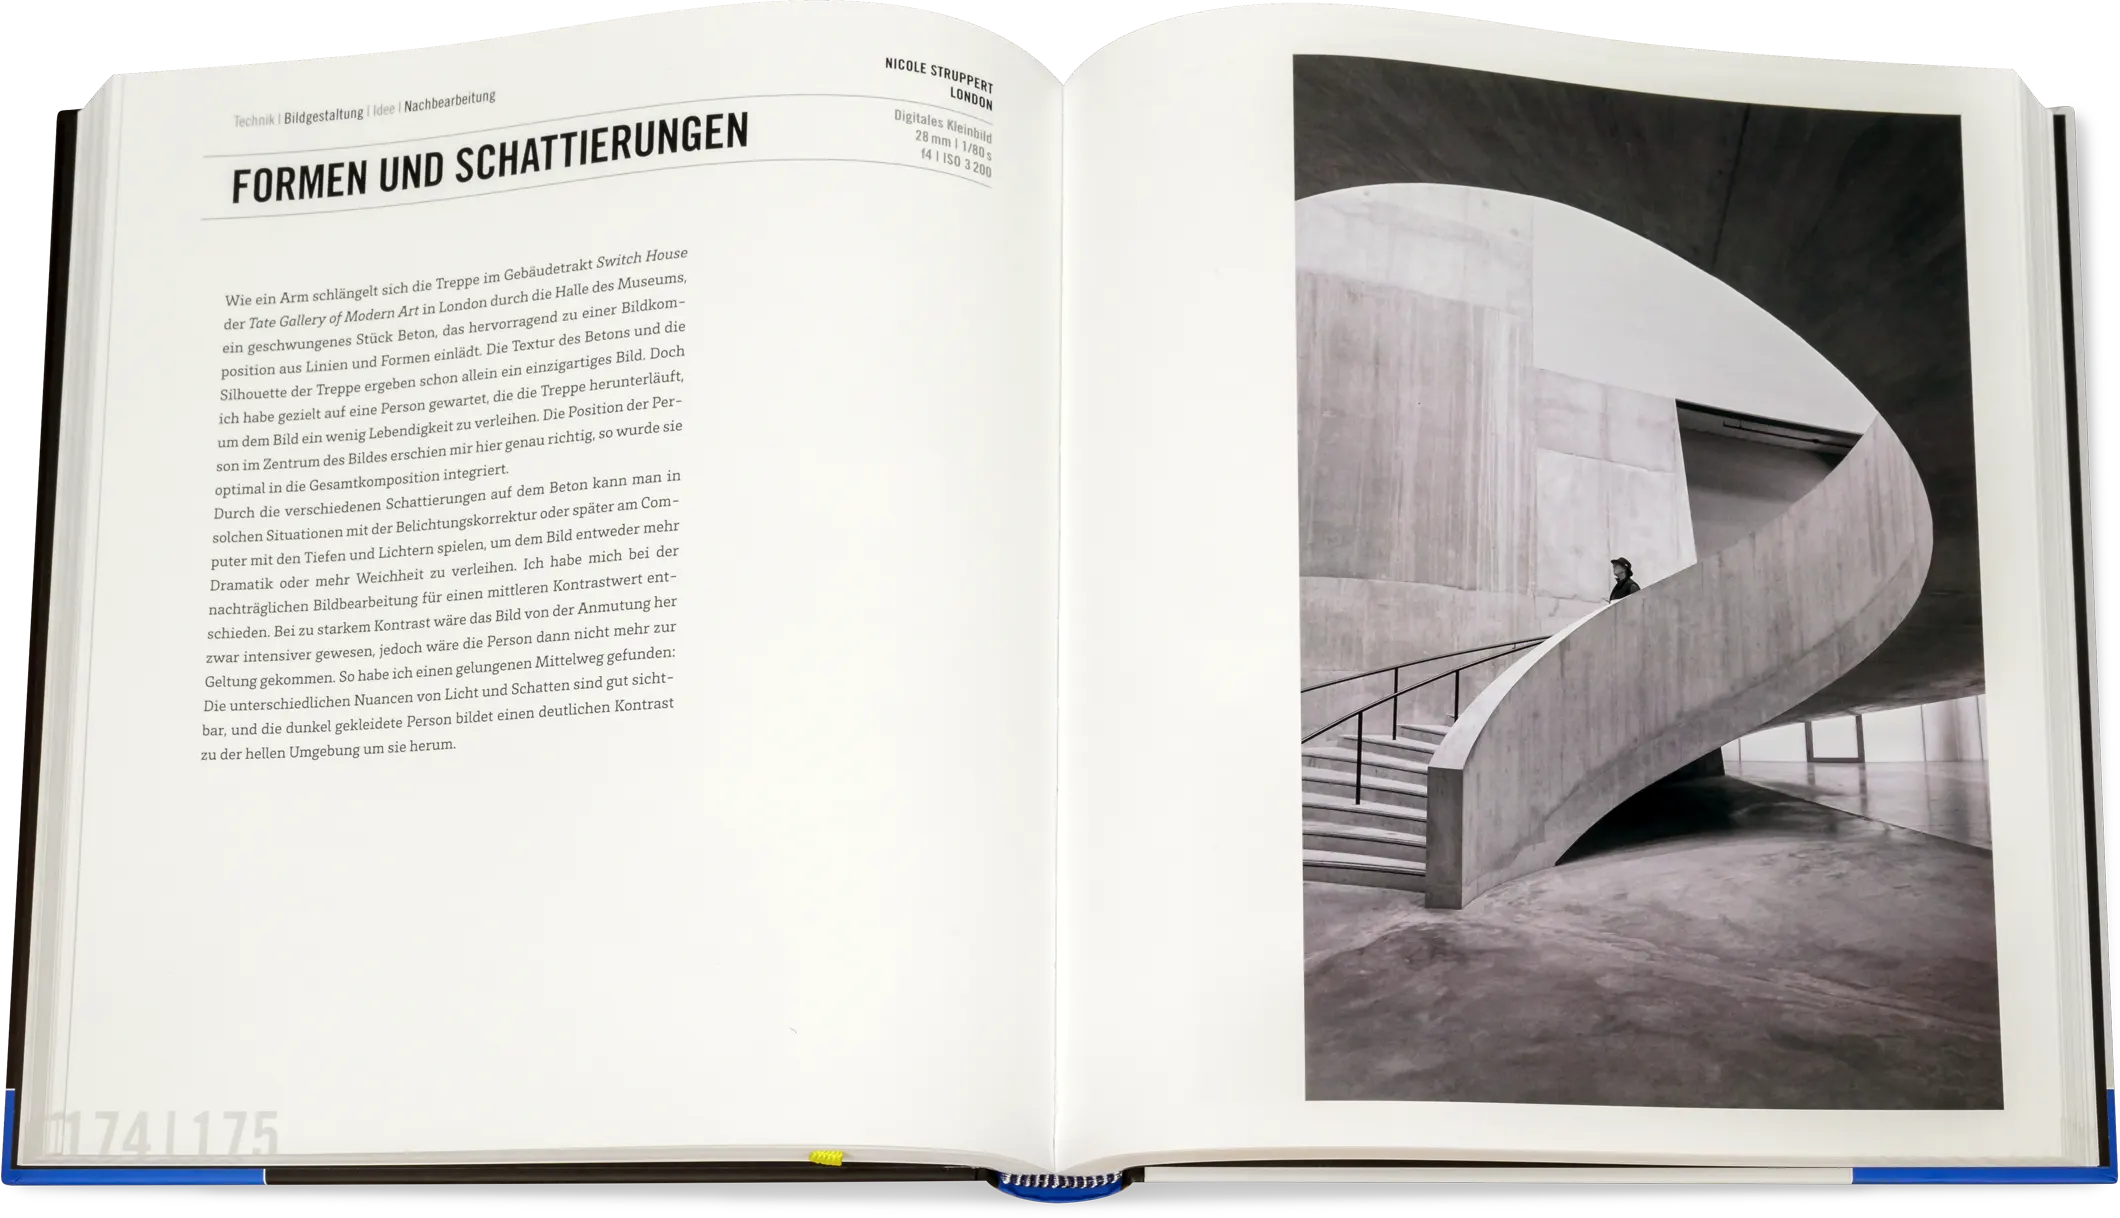 Blick ins Buch: Streetfotografie - made in Germany